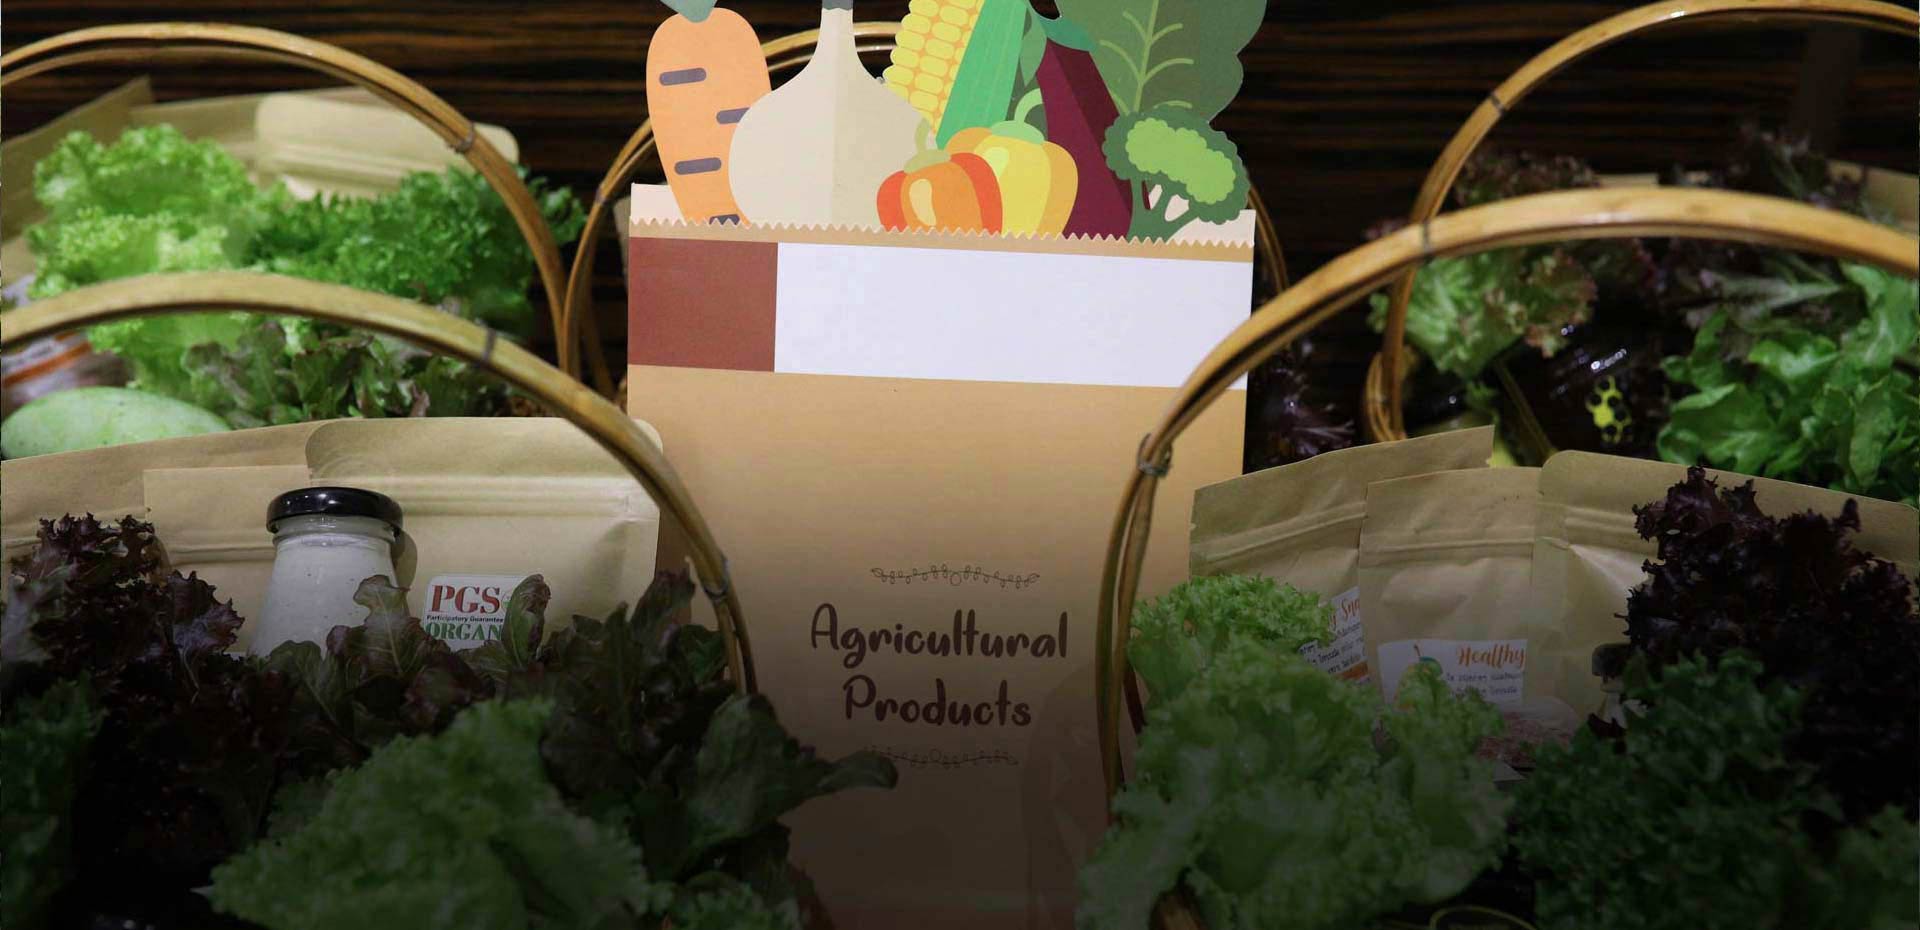 Attractive & Lively Packaging Design for Agriculture Products Banner